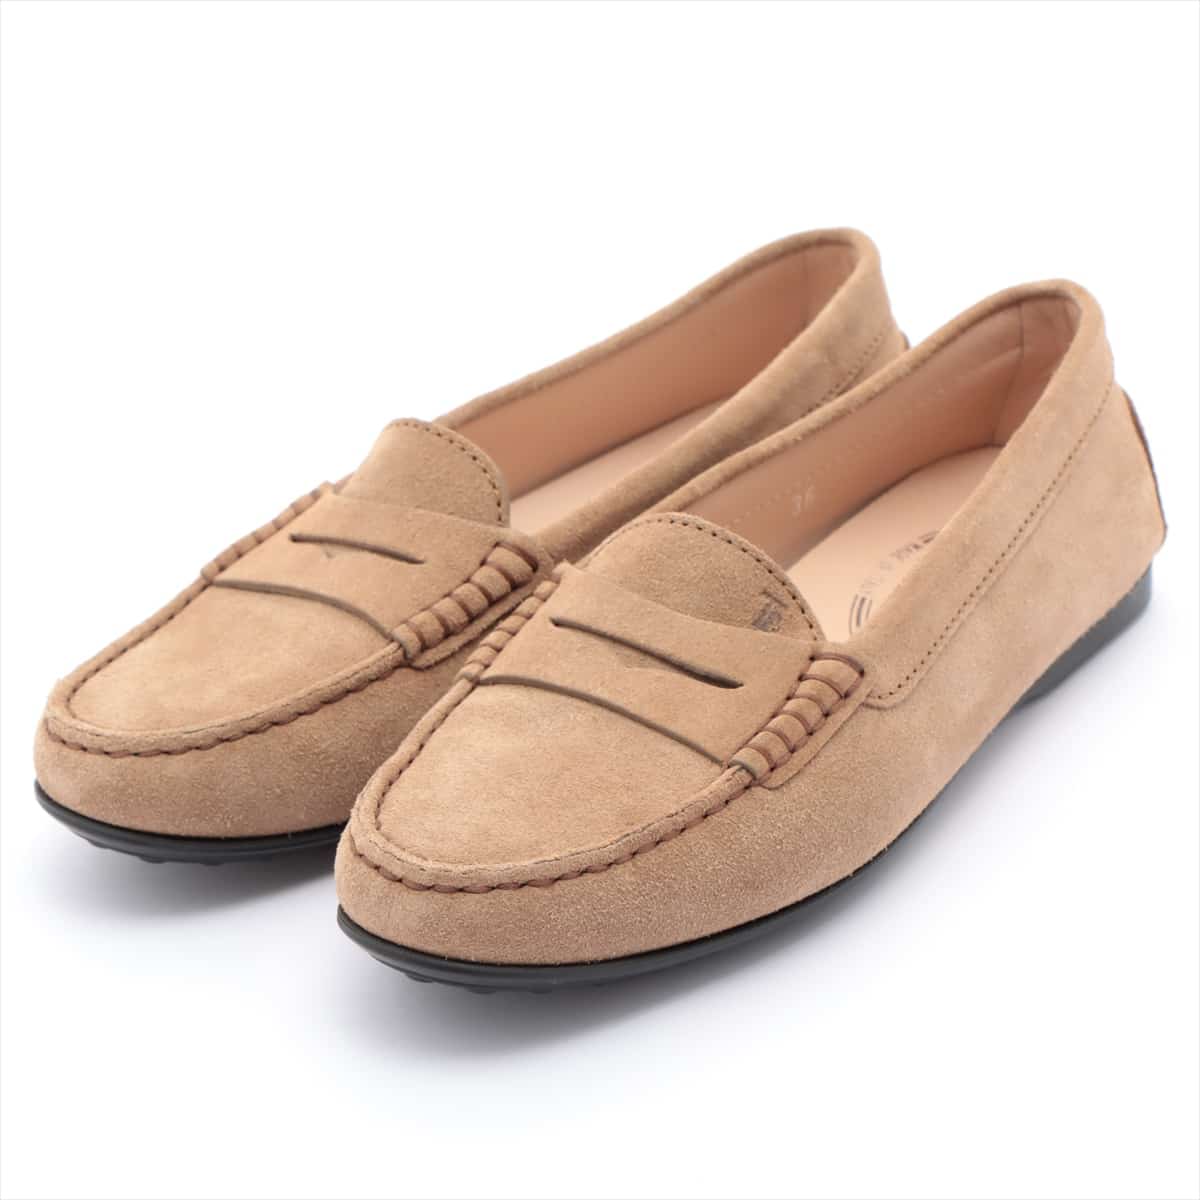 Tod's Suede Driving shoes 36 Ladies' Beige